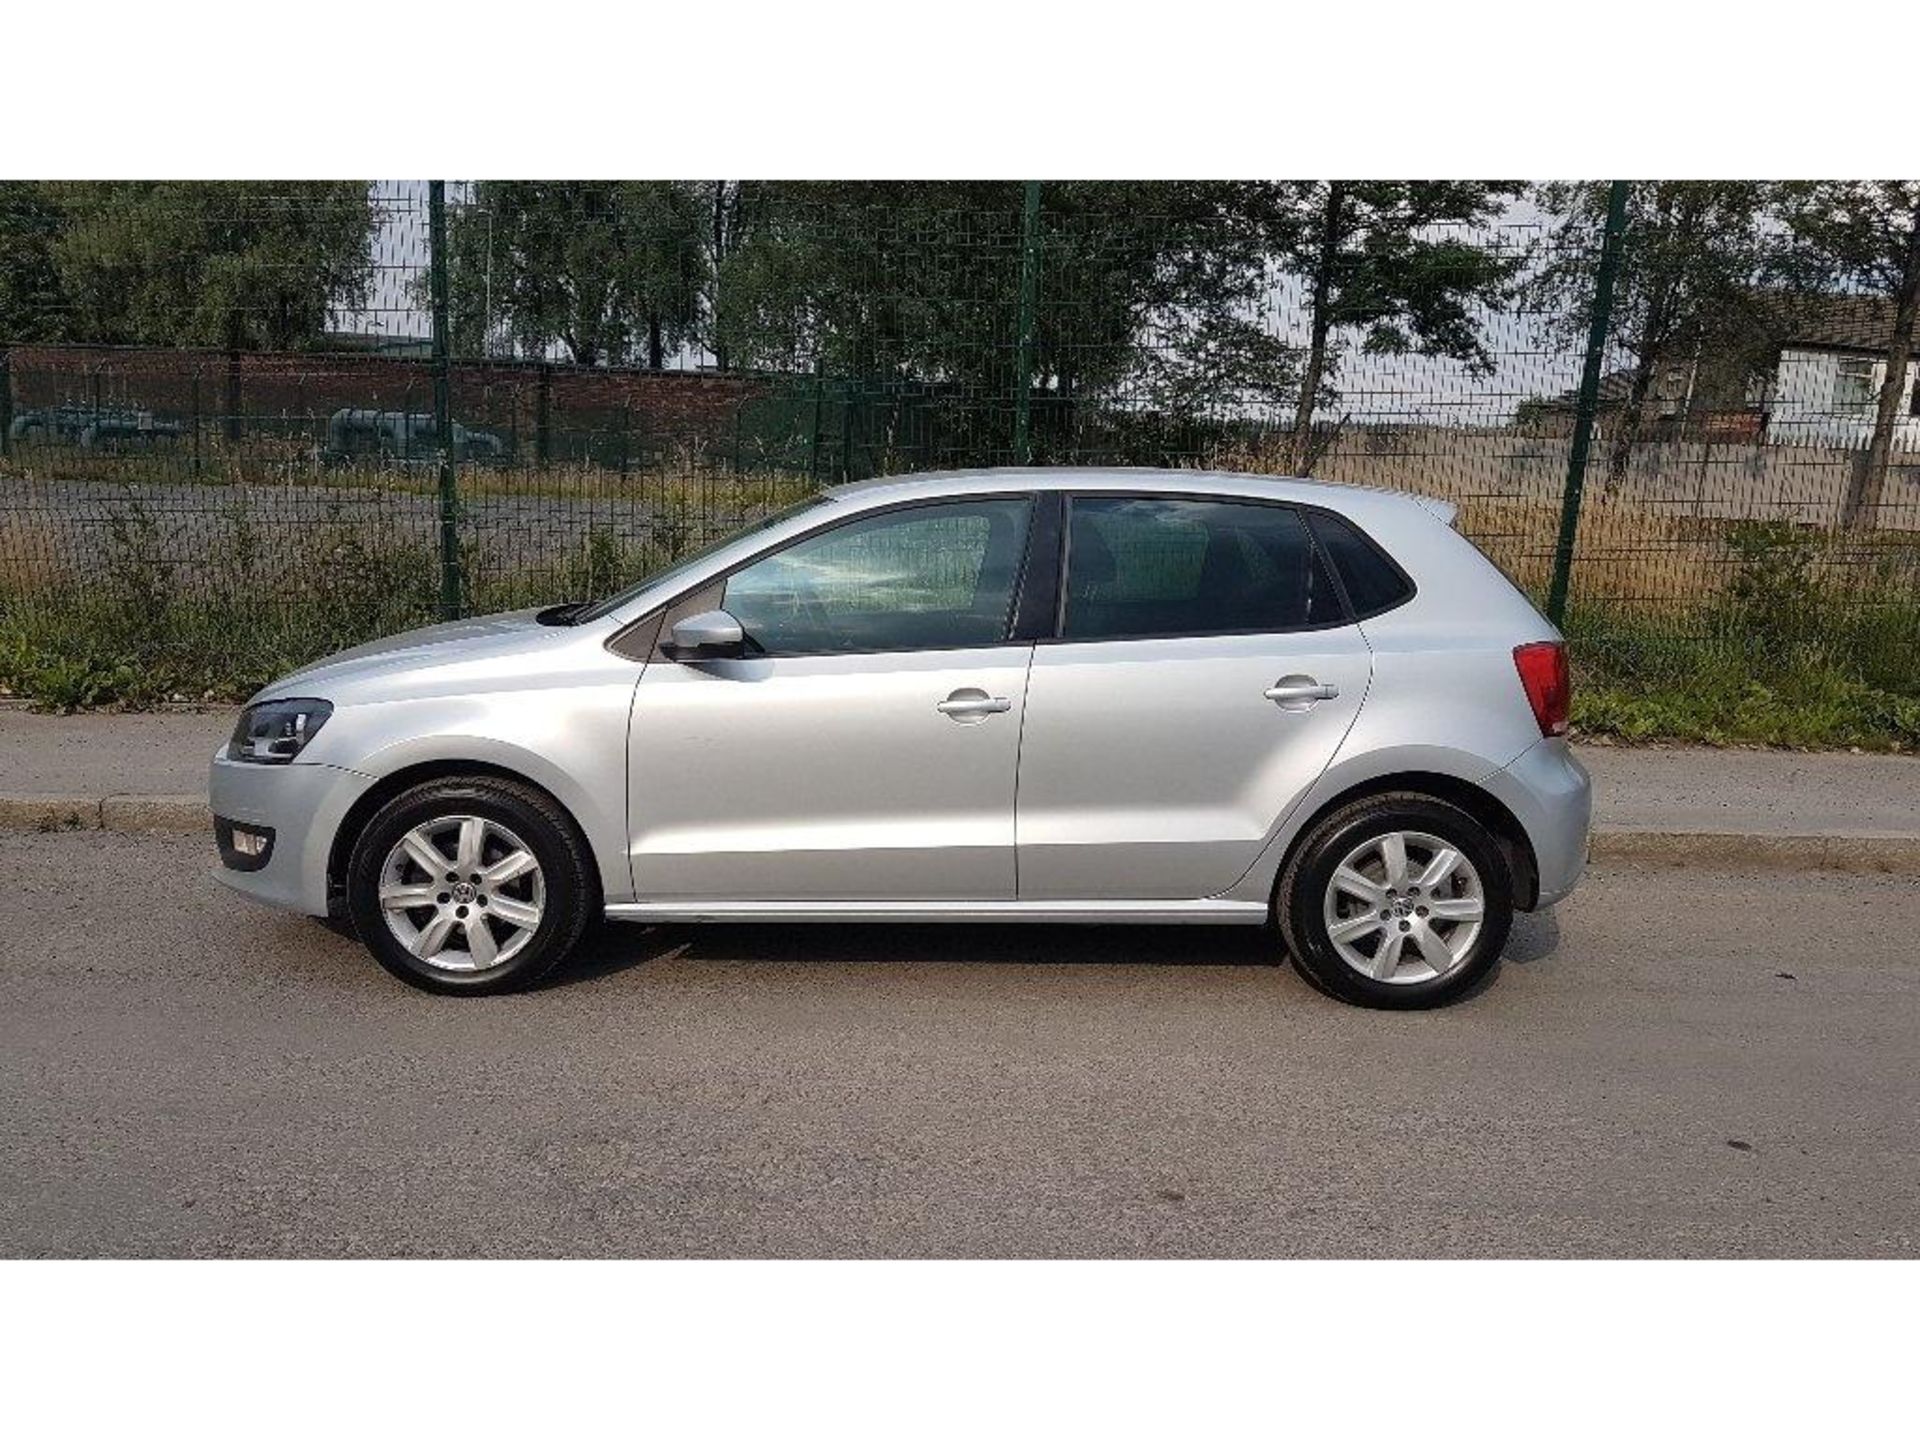 VOLKSWAGEN POLO 1.2 MATCH EDITION 5DR, FT13 HHY, 20.05.2013, PETROL, MILEAGE 28,499, MANUAL, 1.2L, 2 - Image 14 of 19